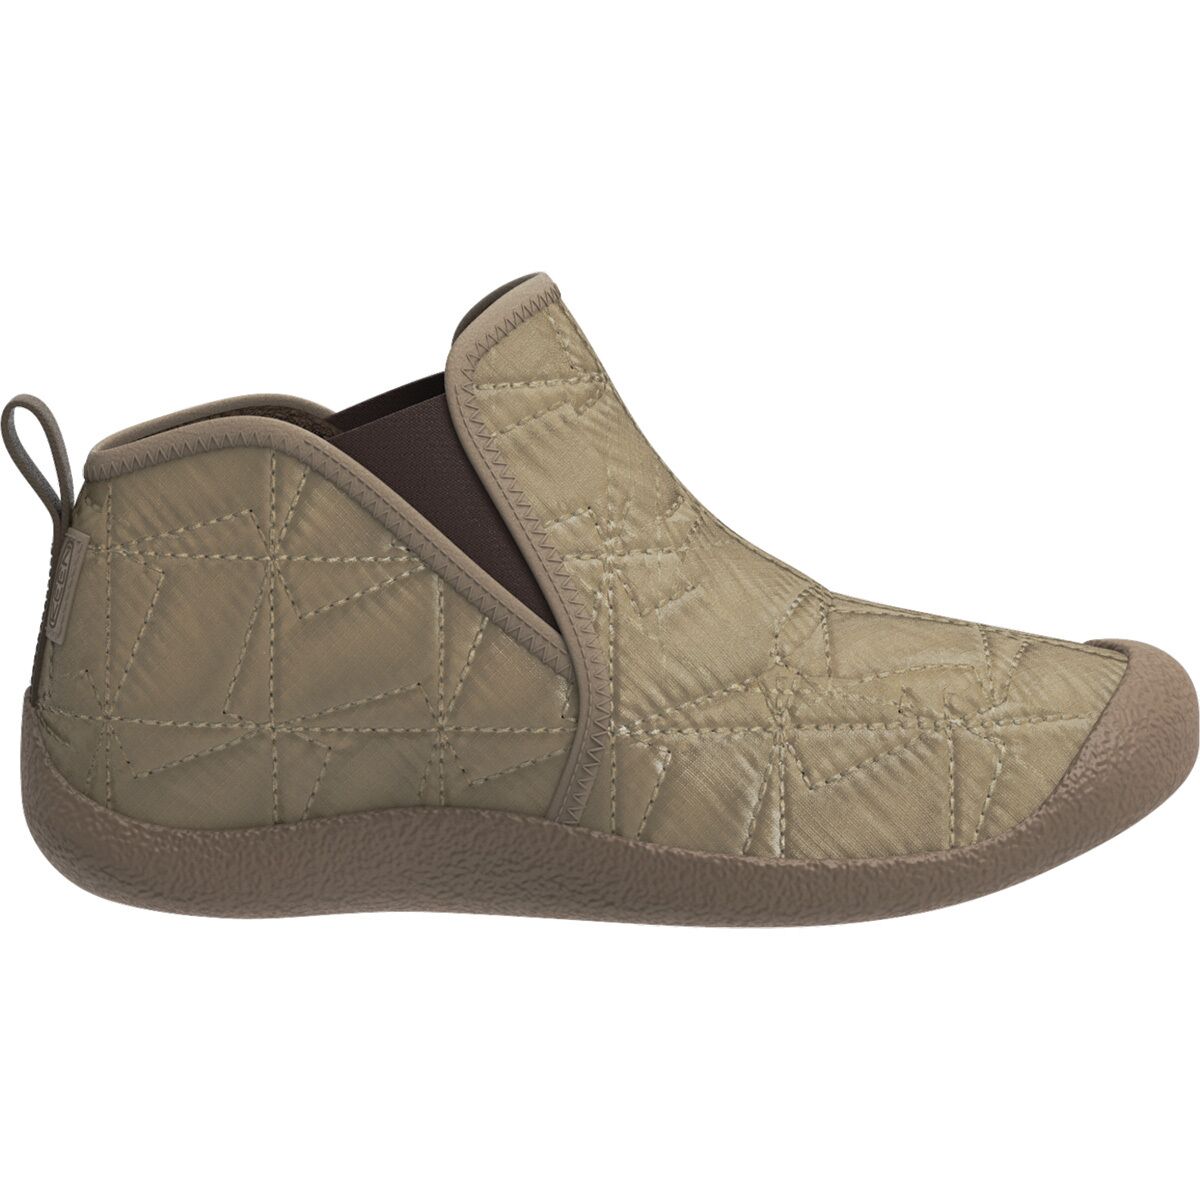 KEEN Howser Ankle Boot - Women's